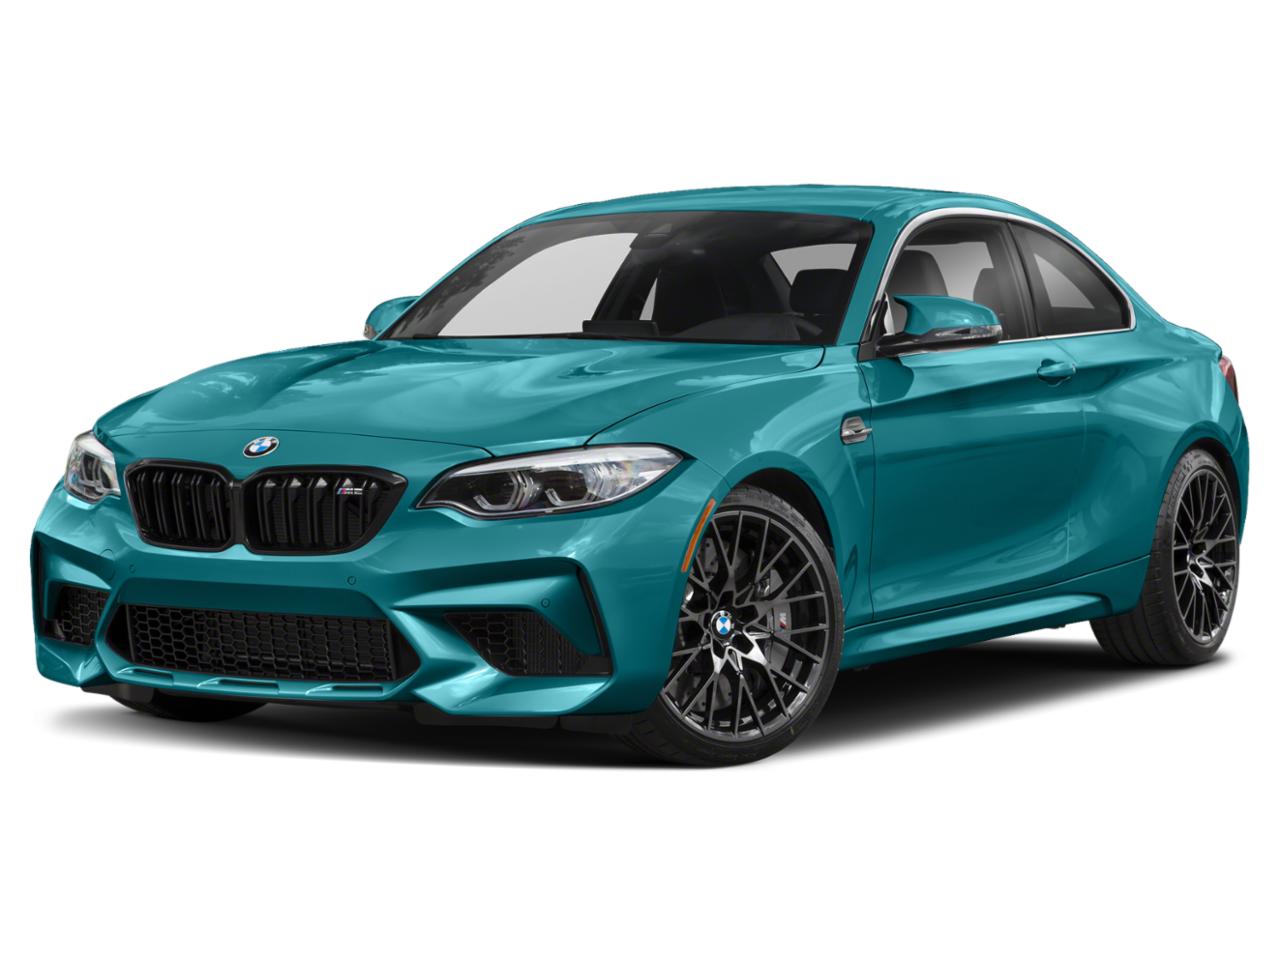  BMW M2 oem parts and accessories on sale